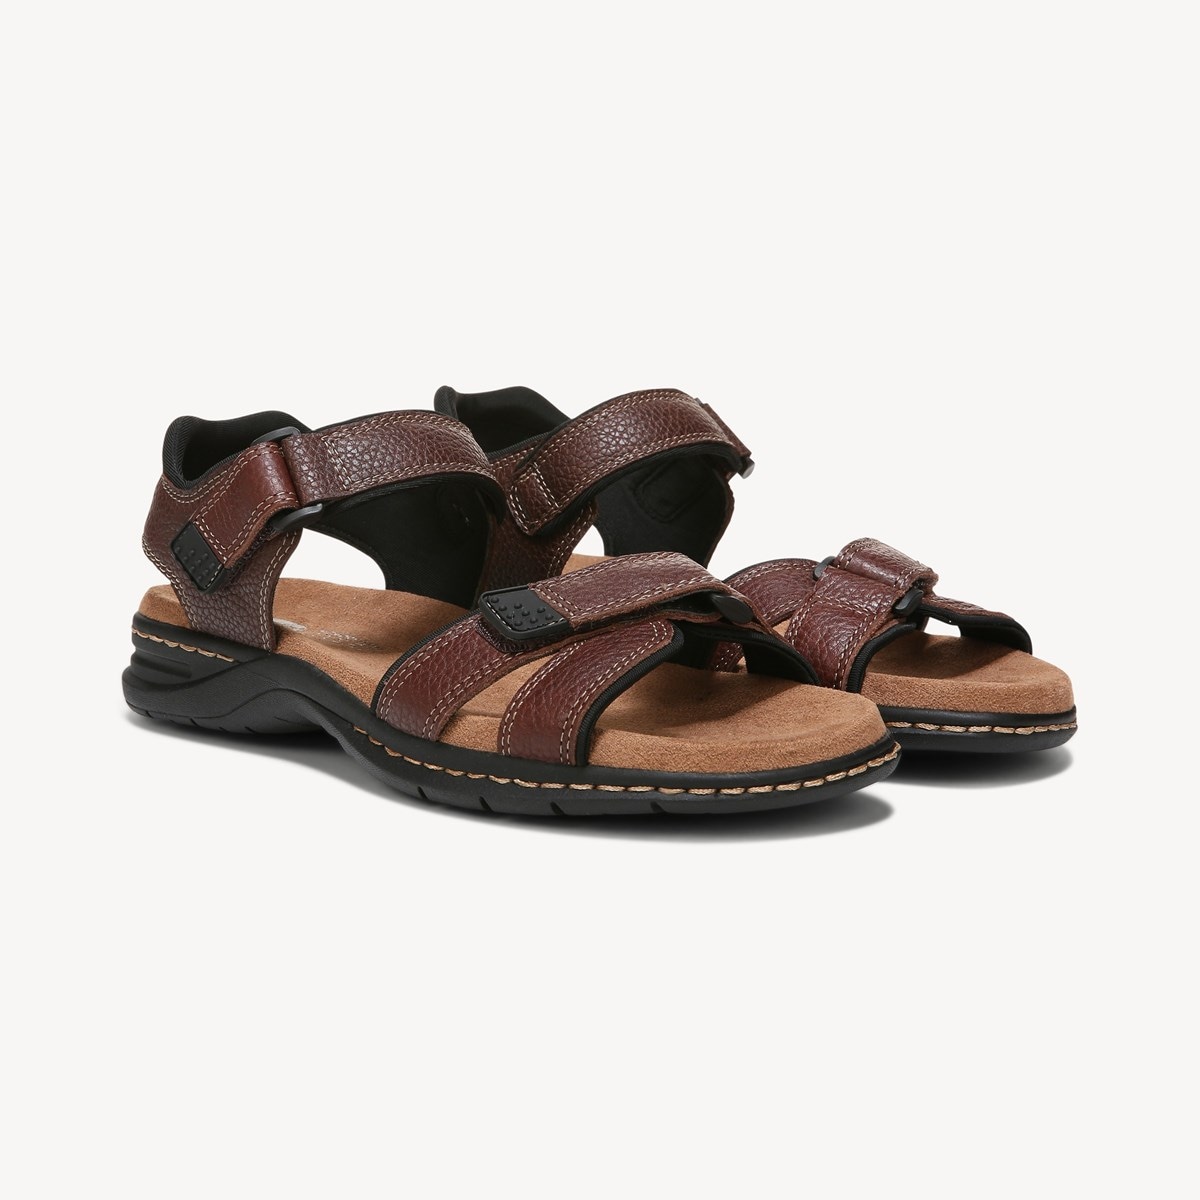 dr scholl's one strap leather casuals